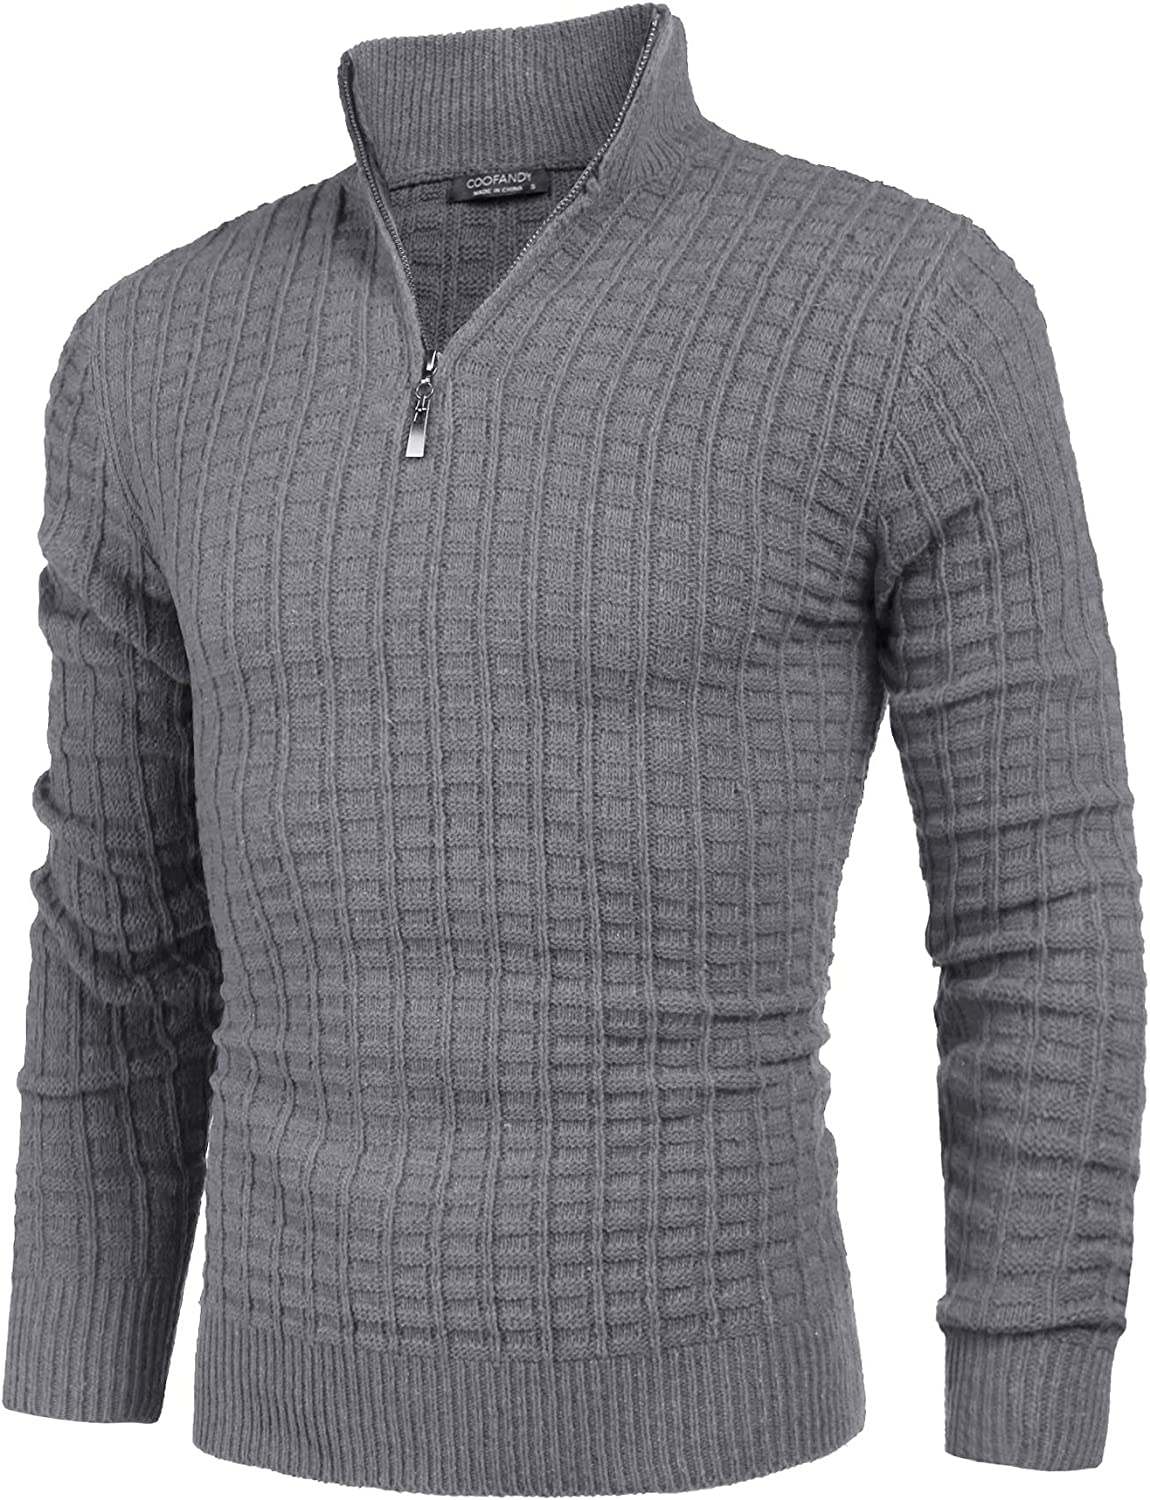 COOFANDY Mens Jumpers Knitted Zip Neck Solid Cotton Jumpers 1/4 Zip Pullover